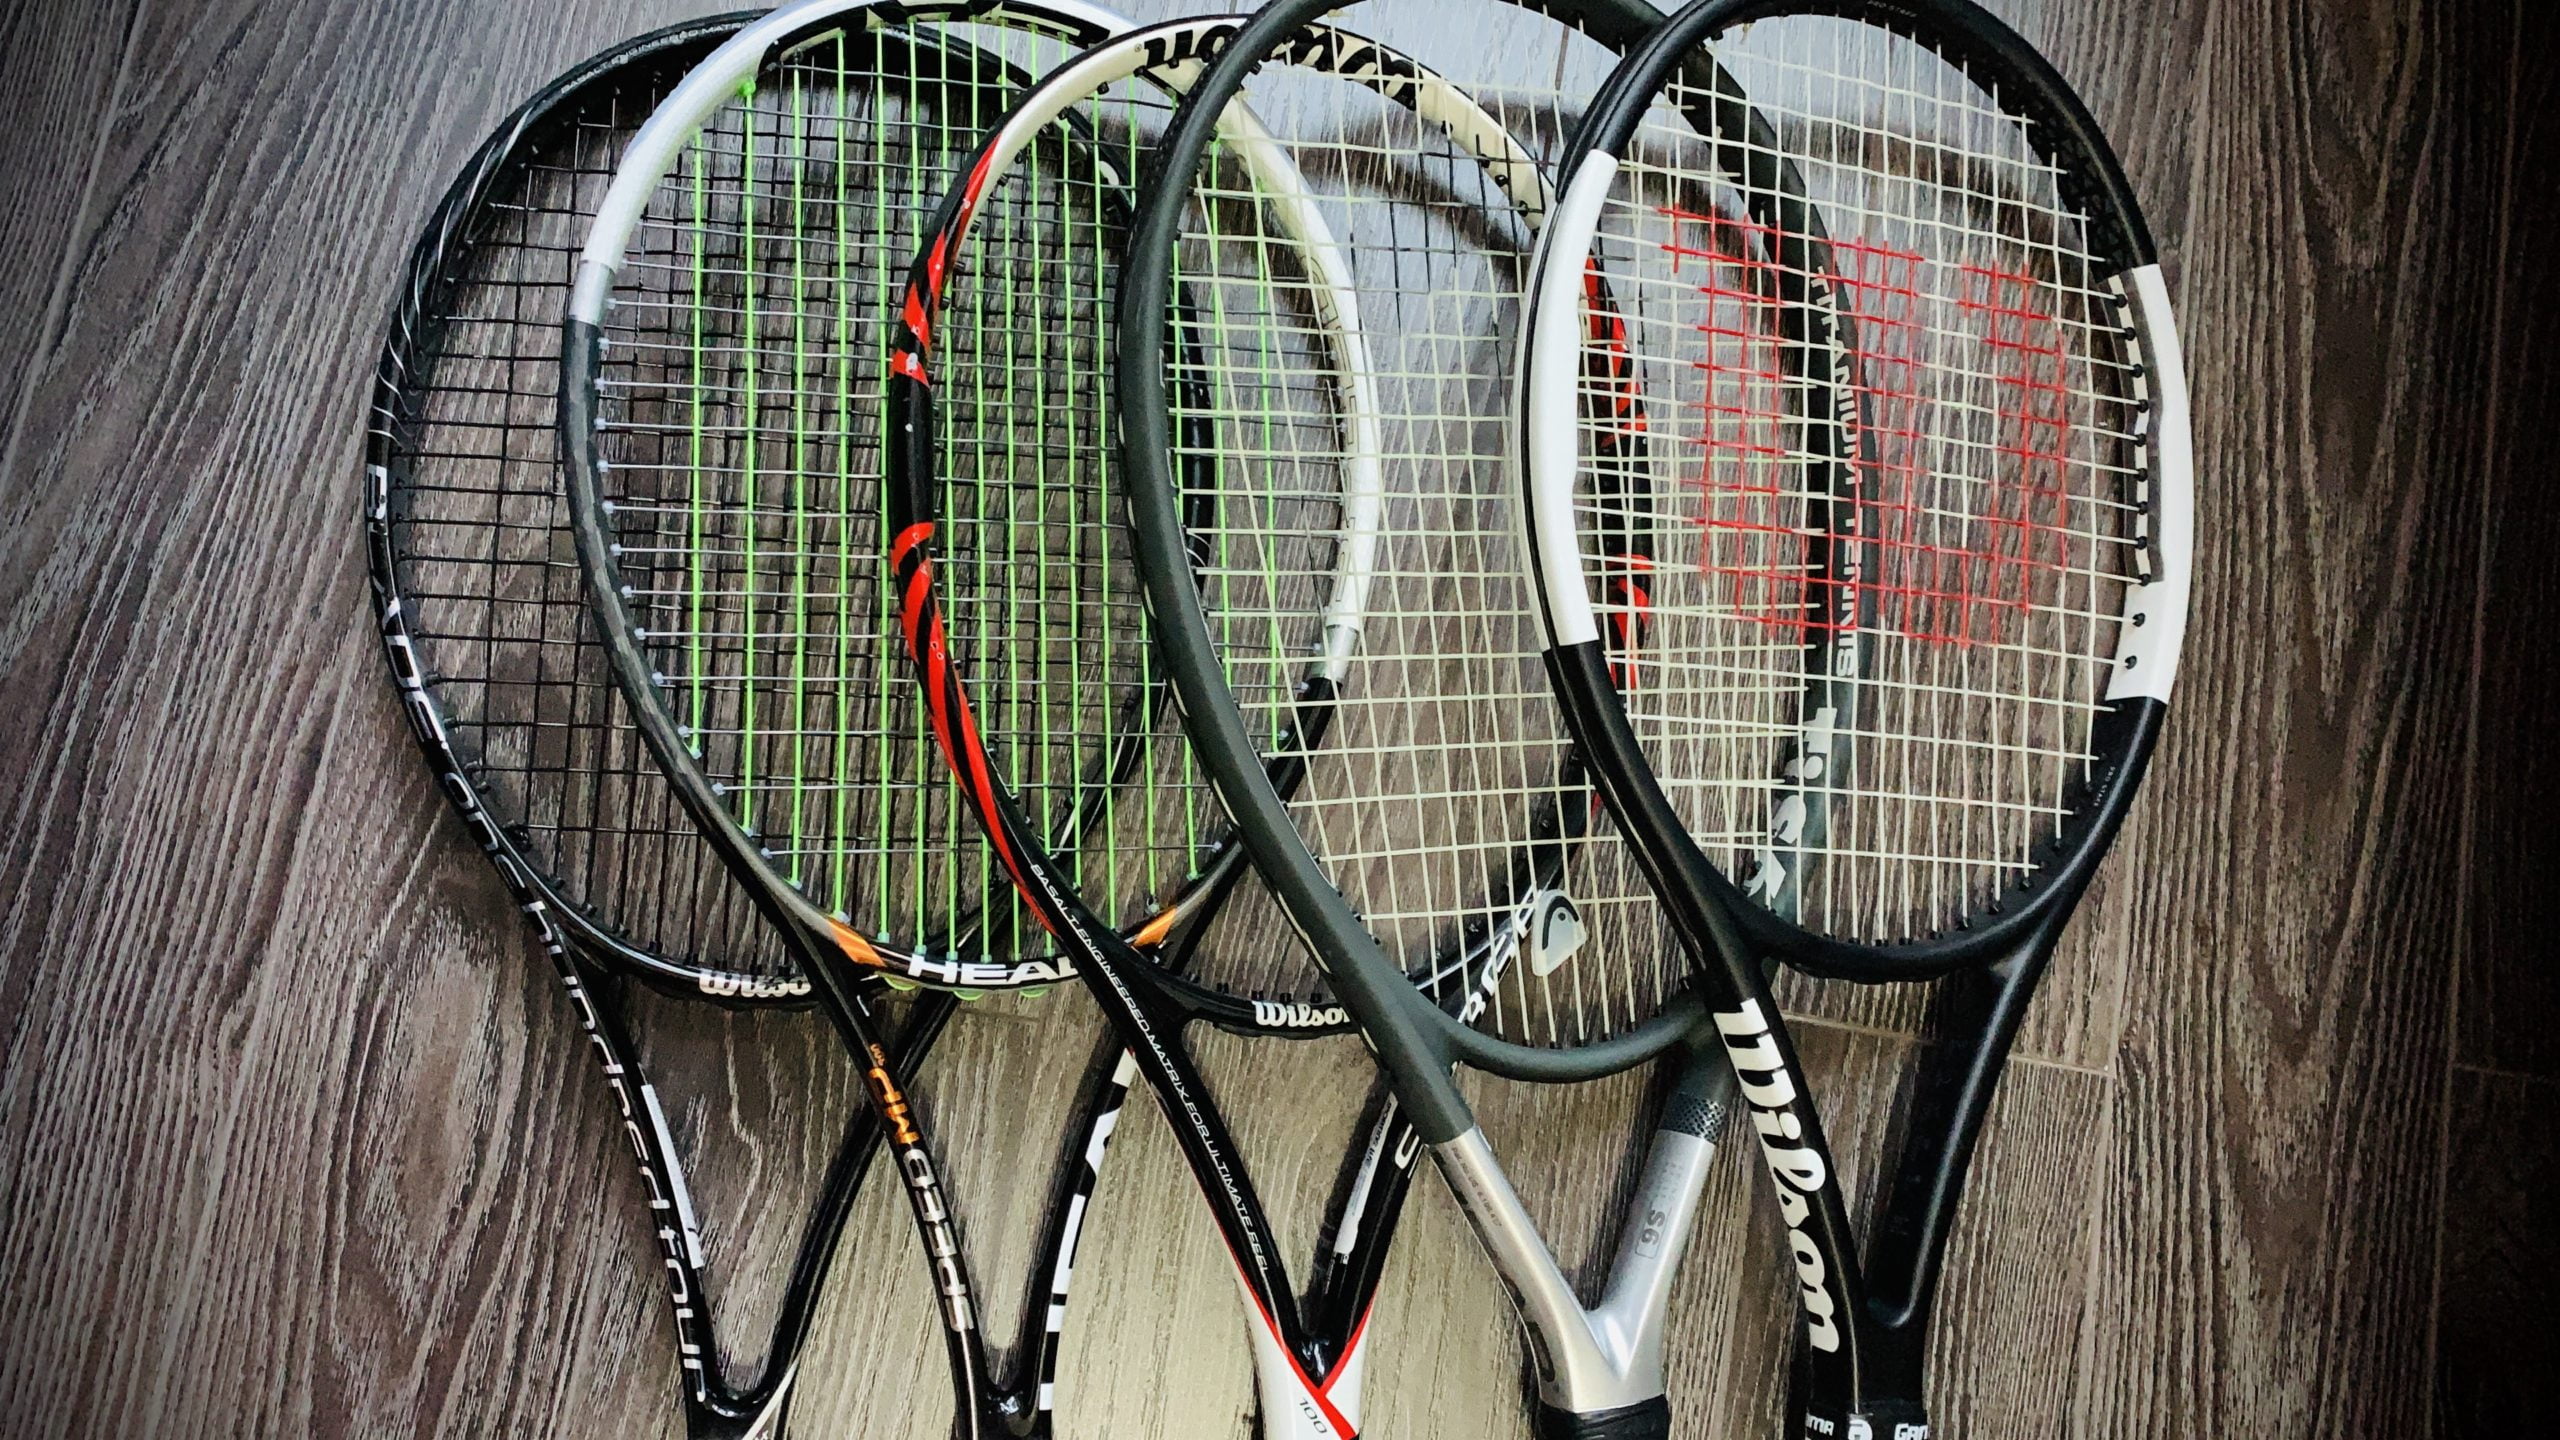 How much can you make stringing tennis rackets?